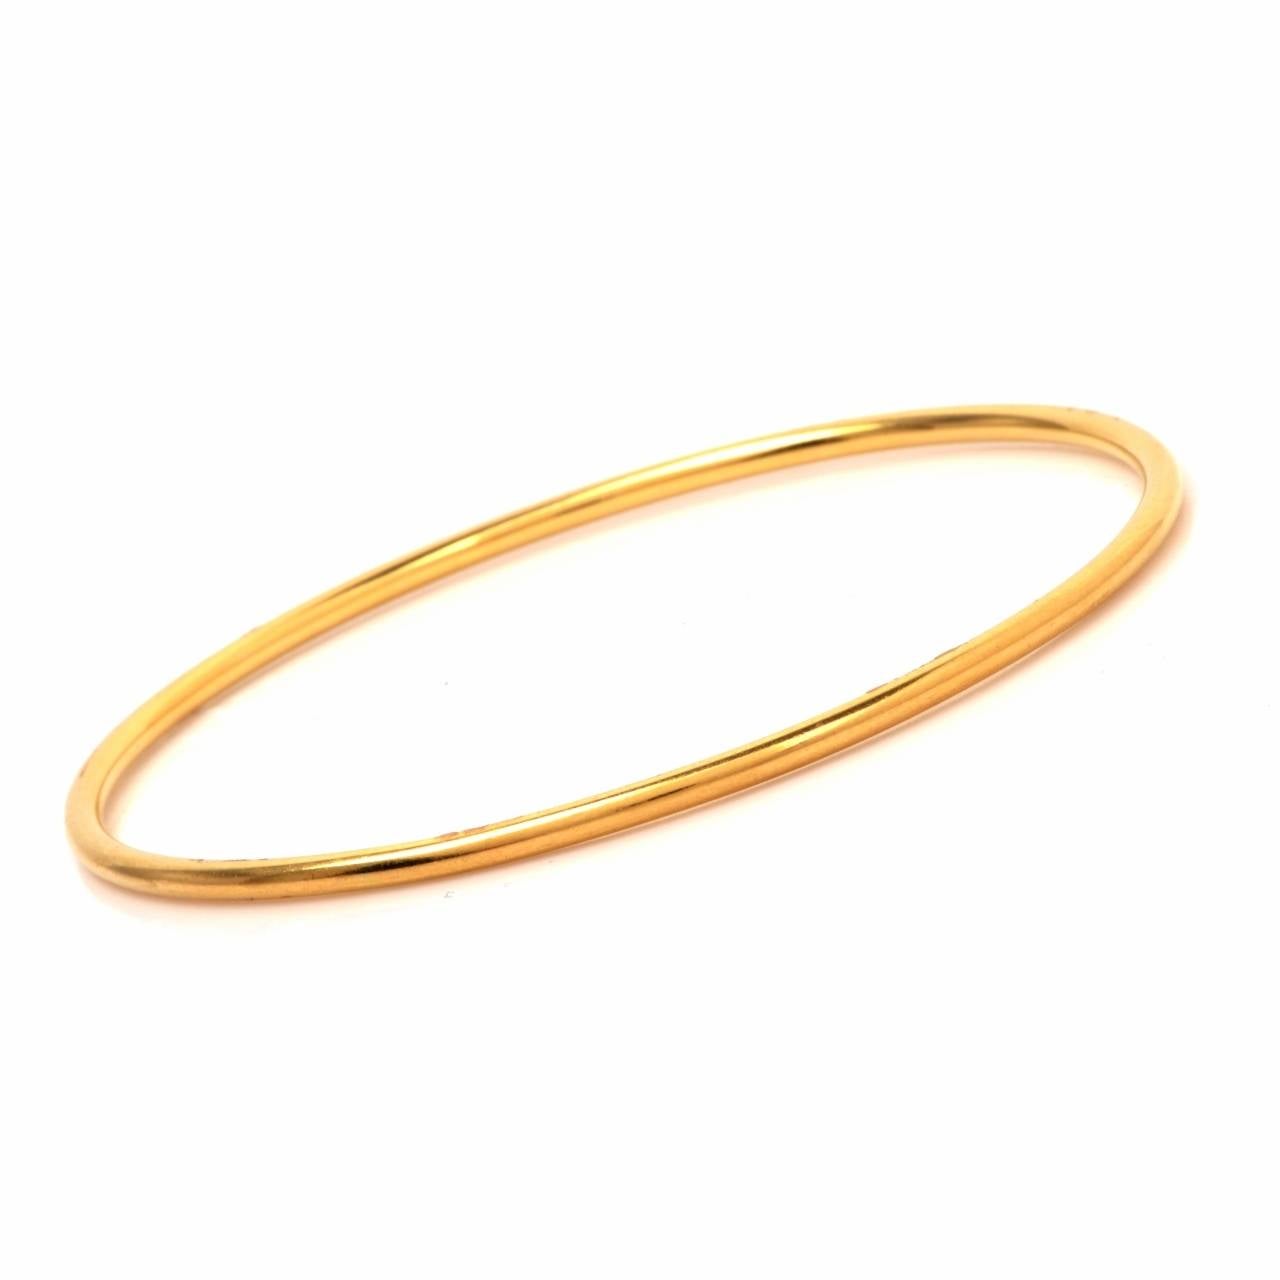 This stackable set of 12  bangle bracelets is handcrafted in solid 18K yellow gold, weighing approx. 172.9 grams. These bangle bracelets  measuring 2.6